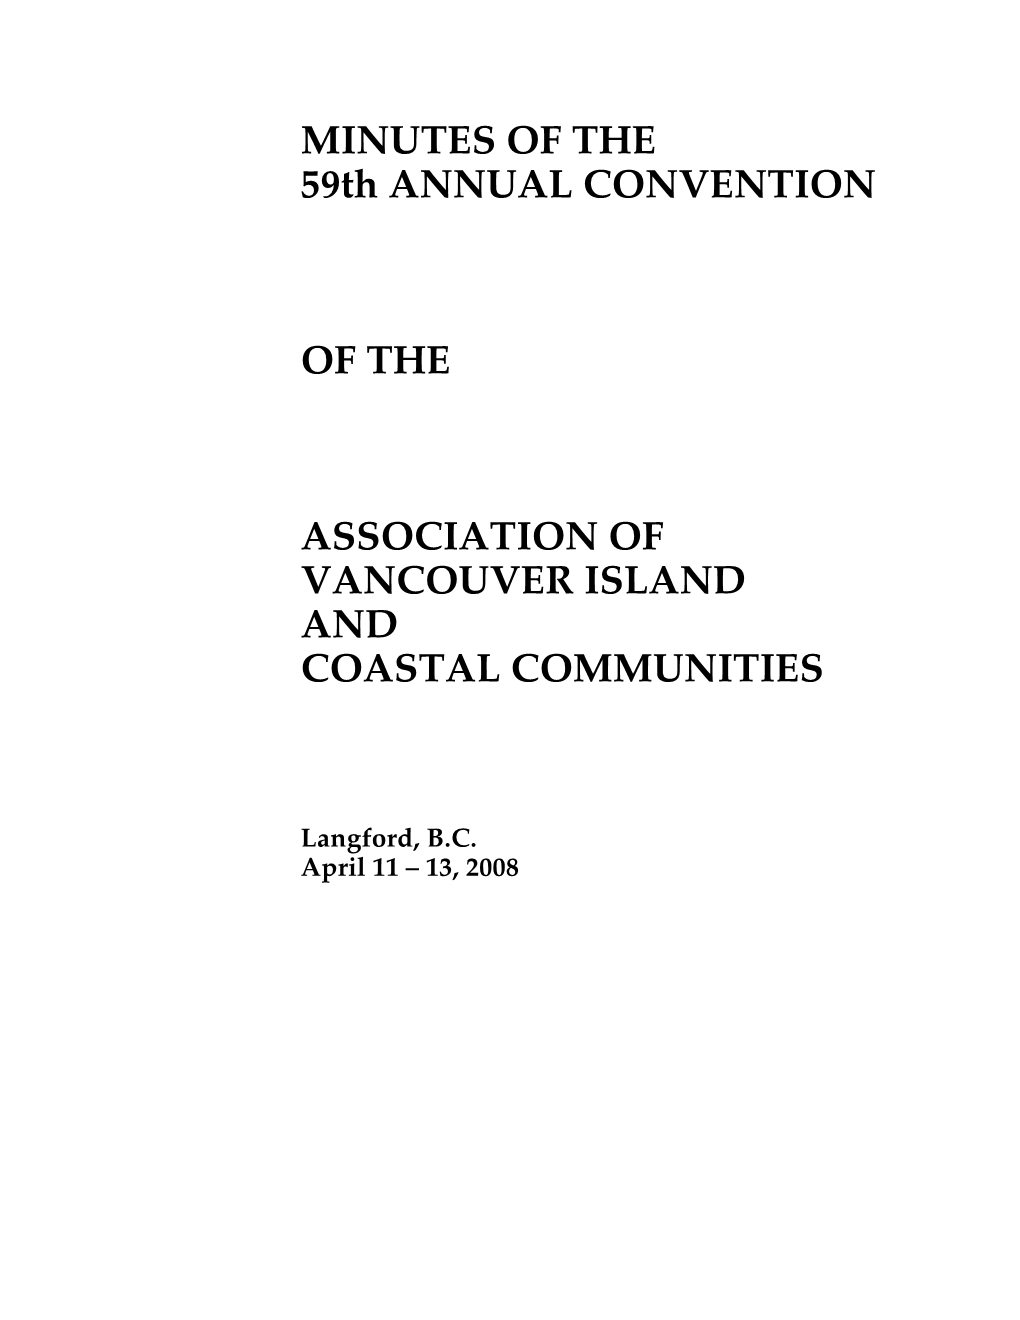 2008 AGM & Convention Minutes